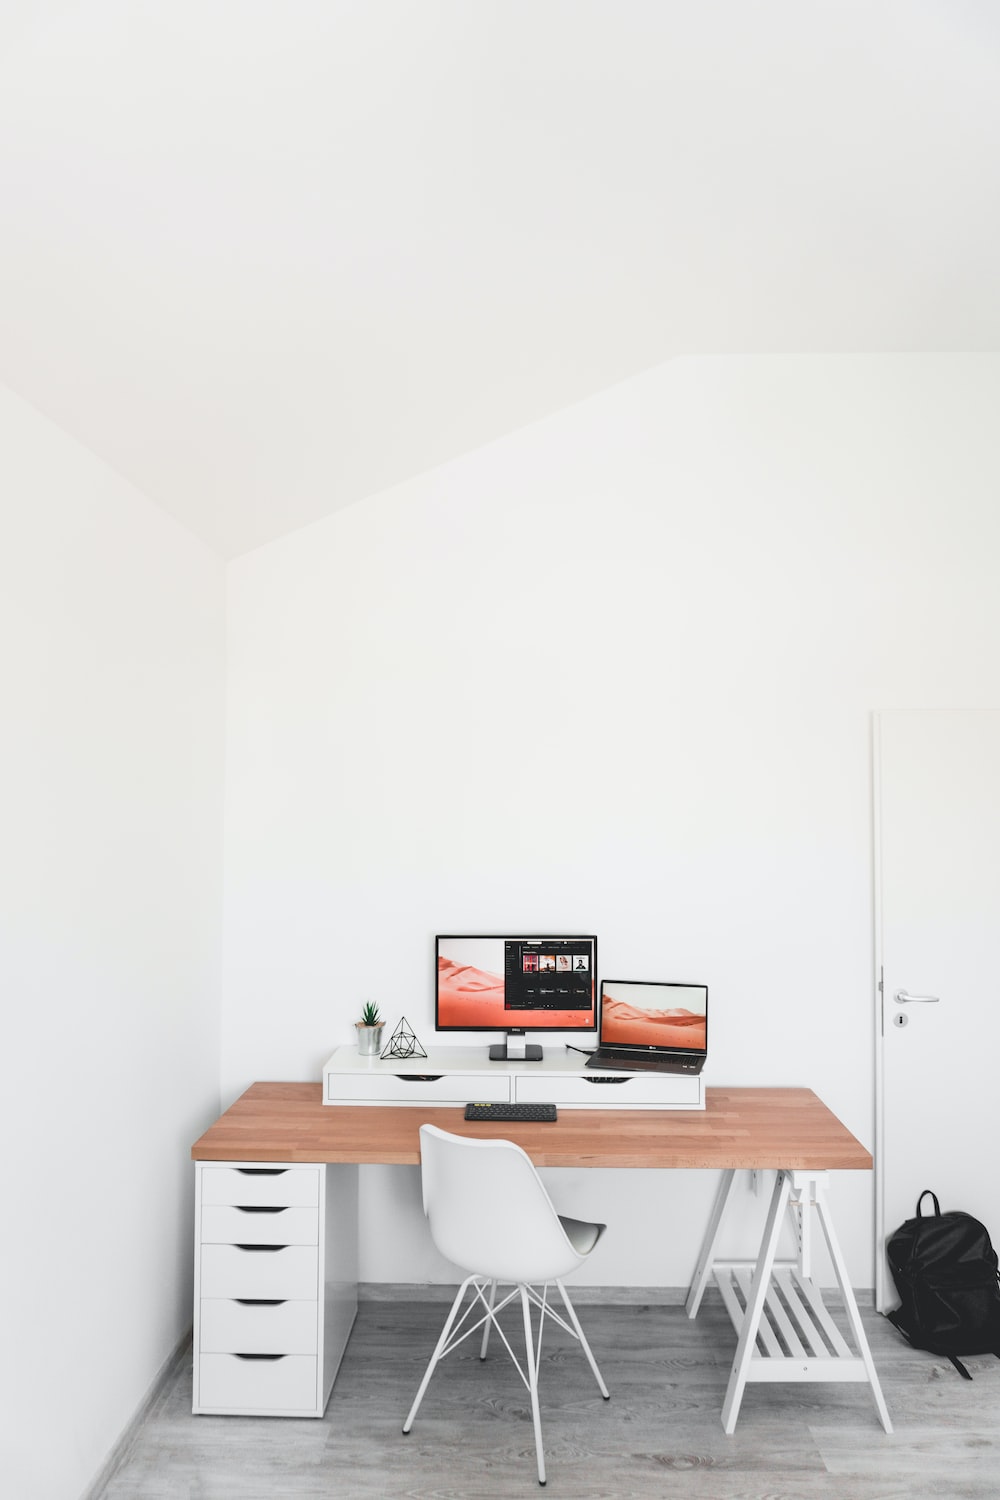 How do you place a desk in a home office?